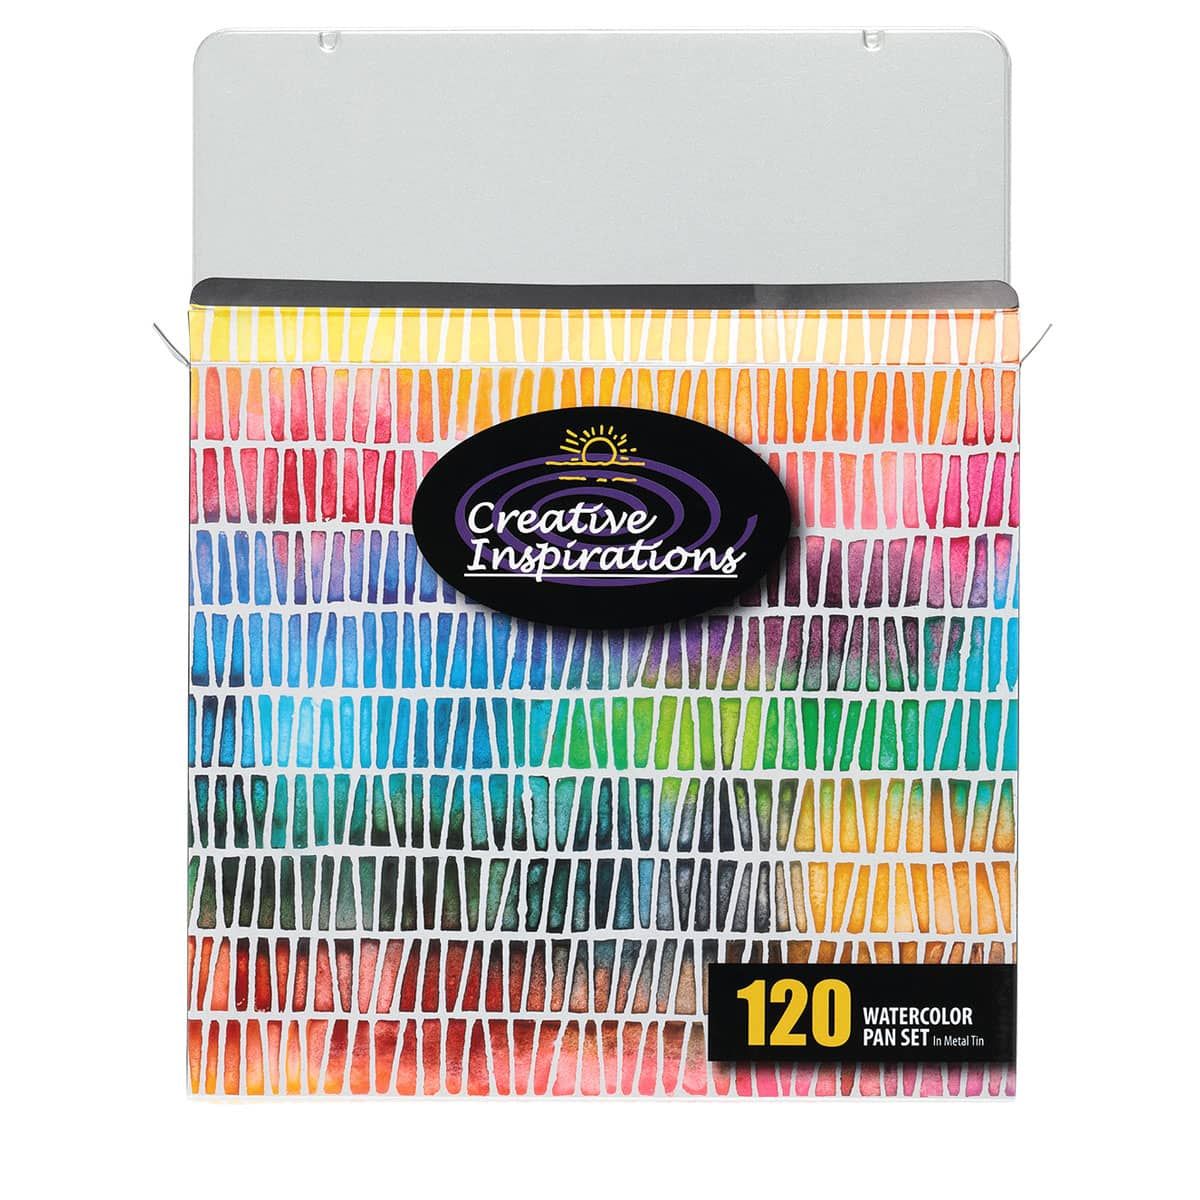 120 brilliant watercolors at an affordable price